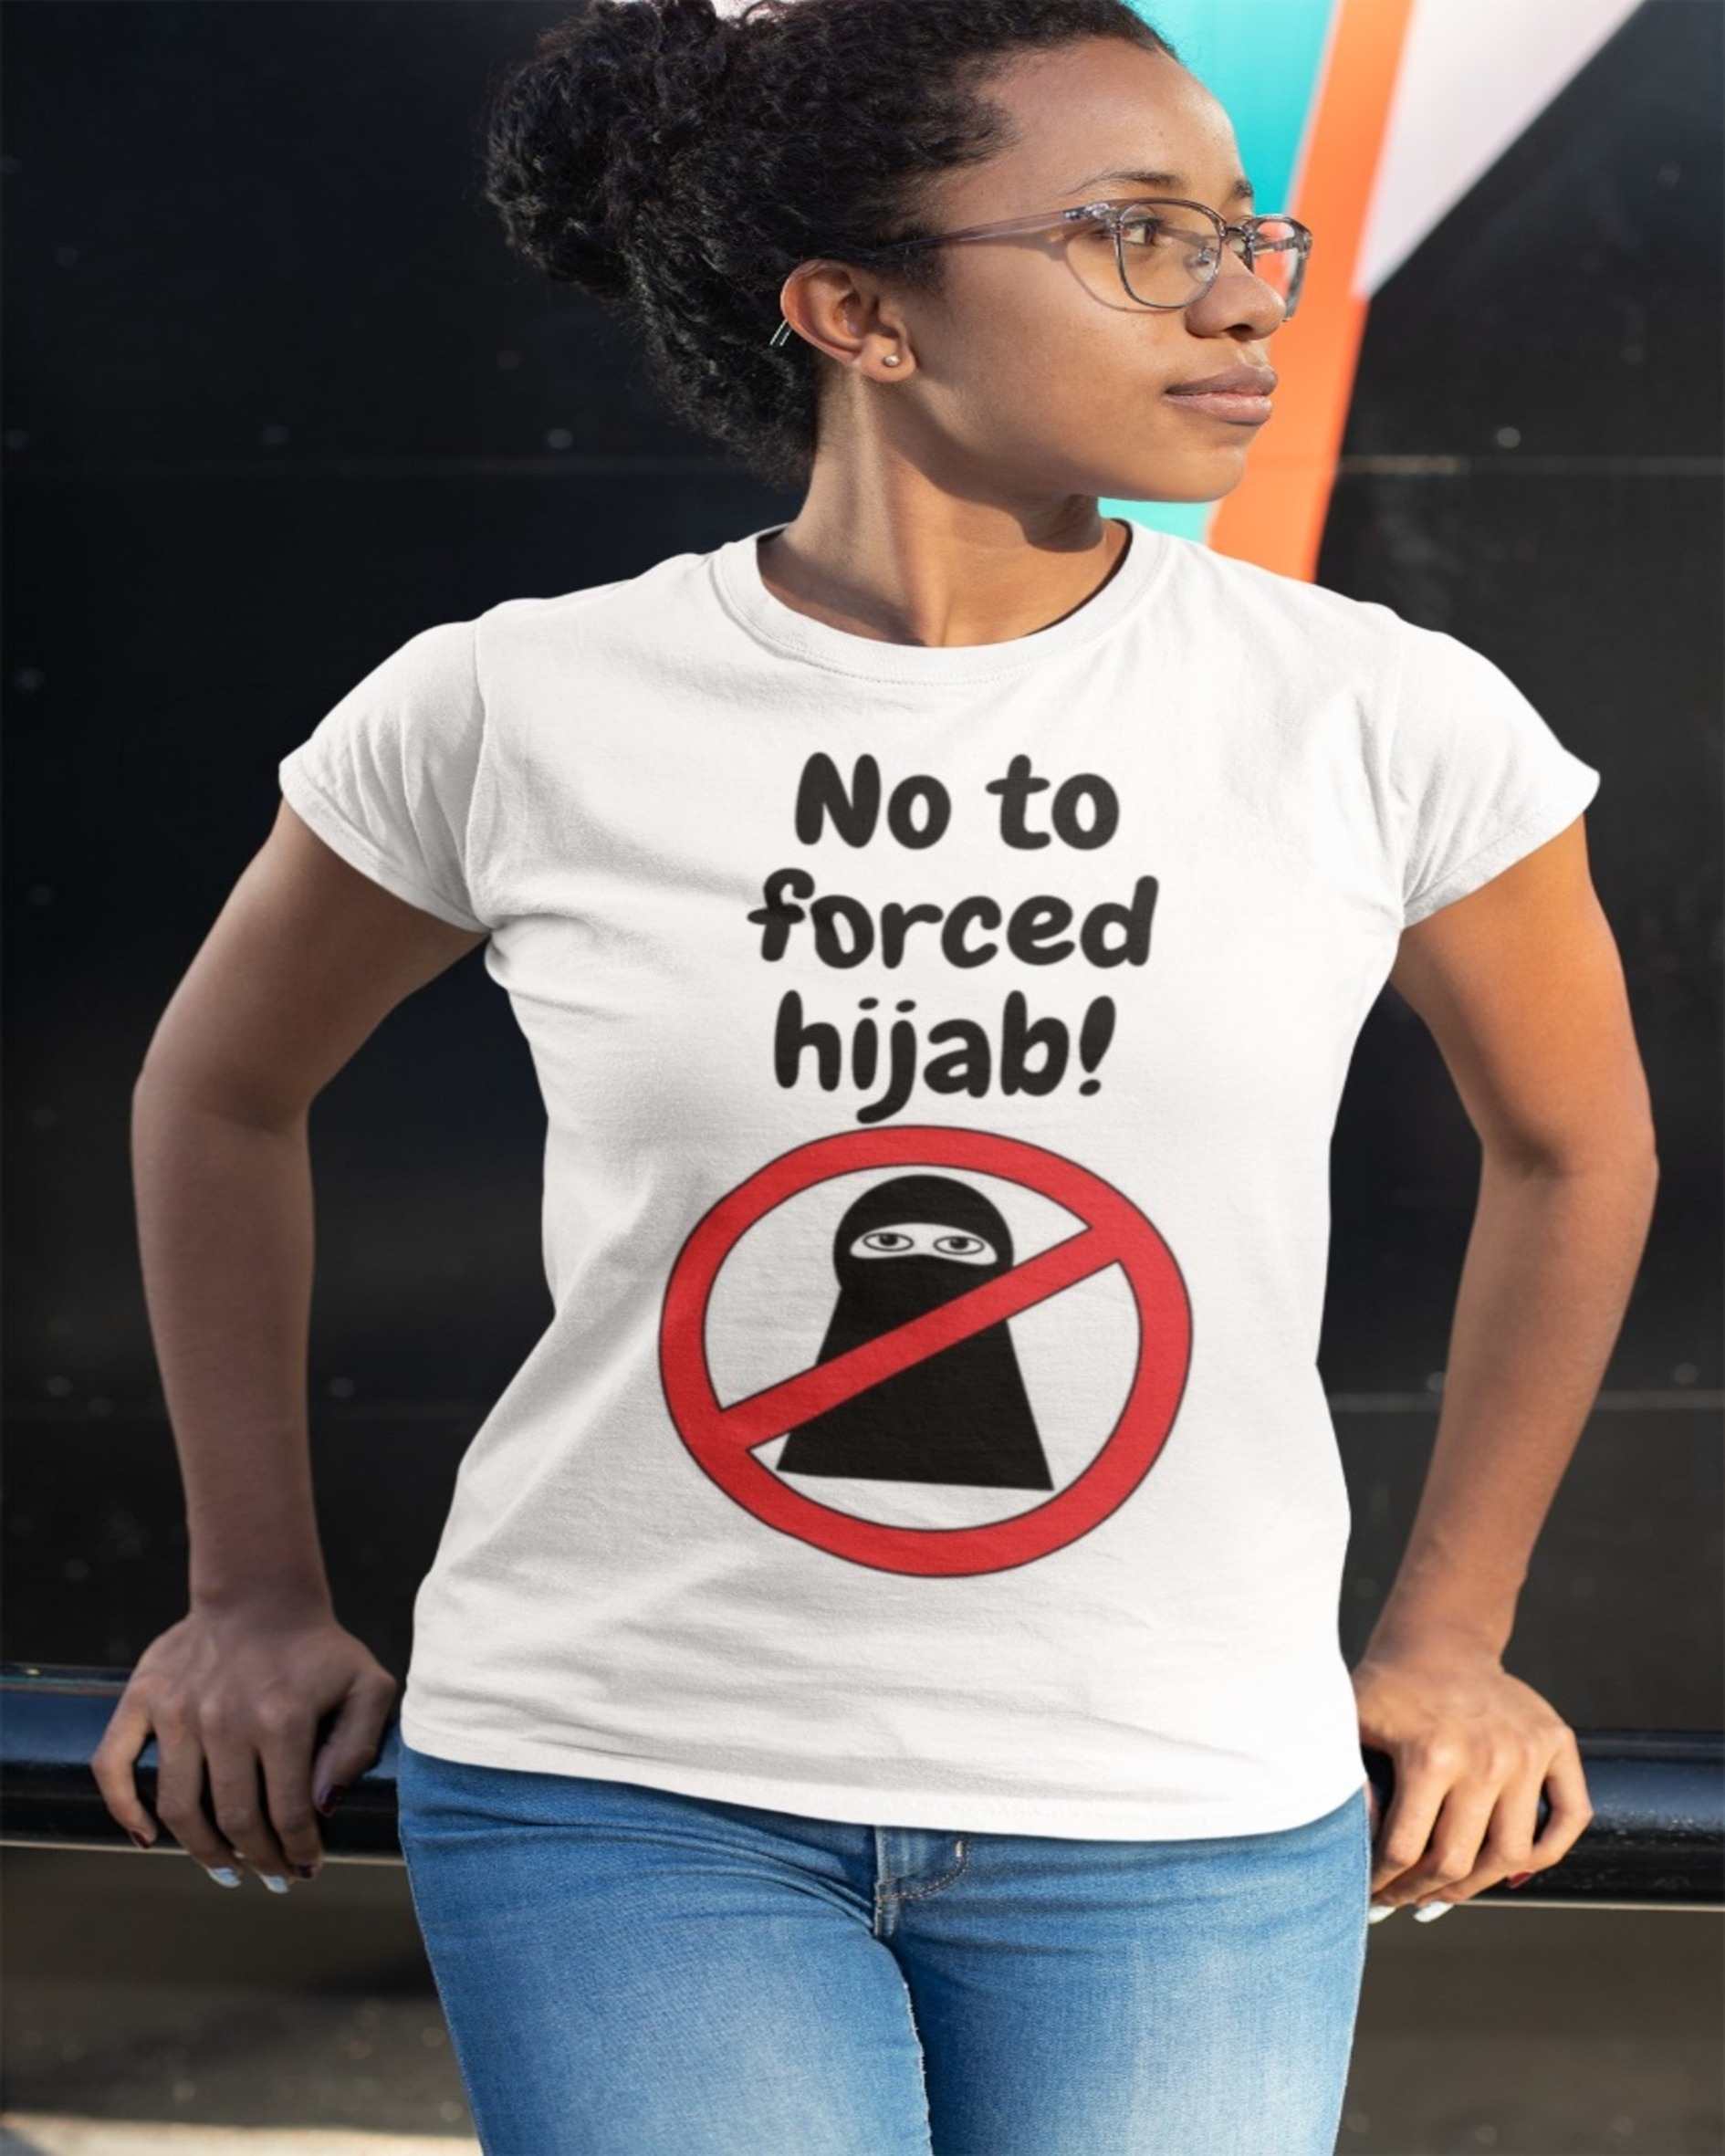 Inands | "No To Forced Hijab" T-Shirt undefined